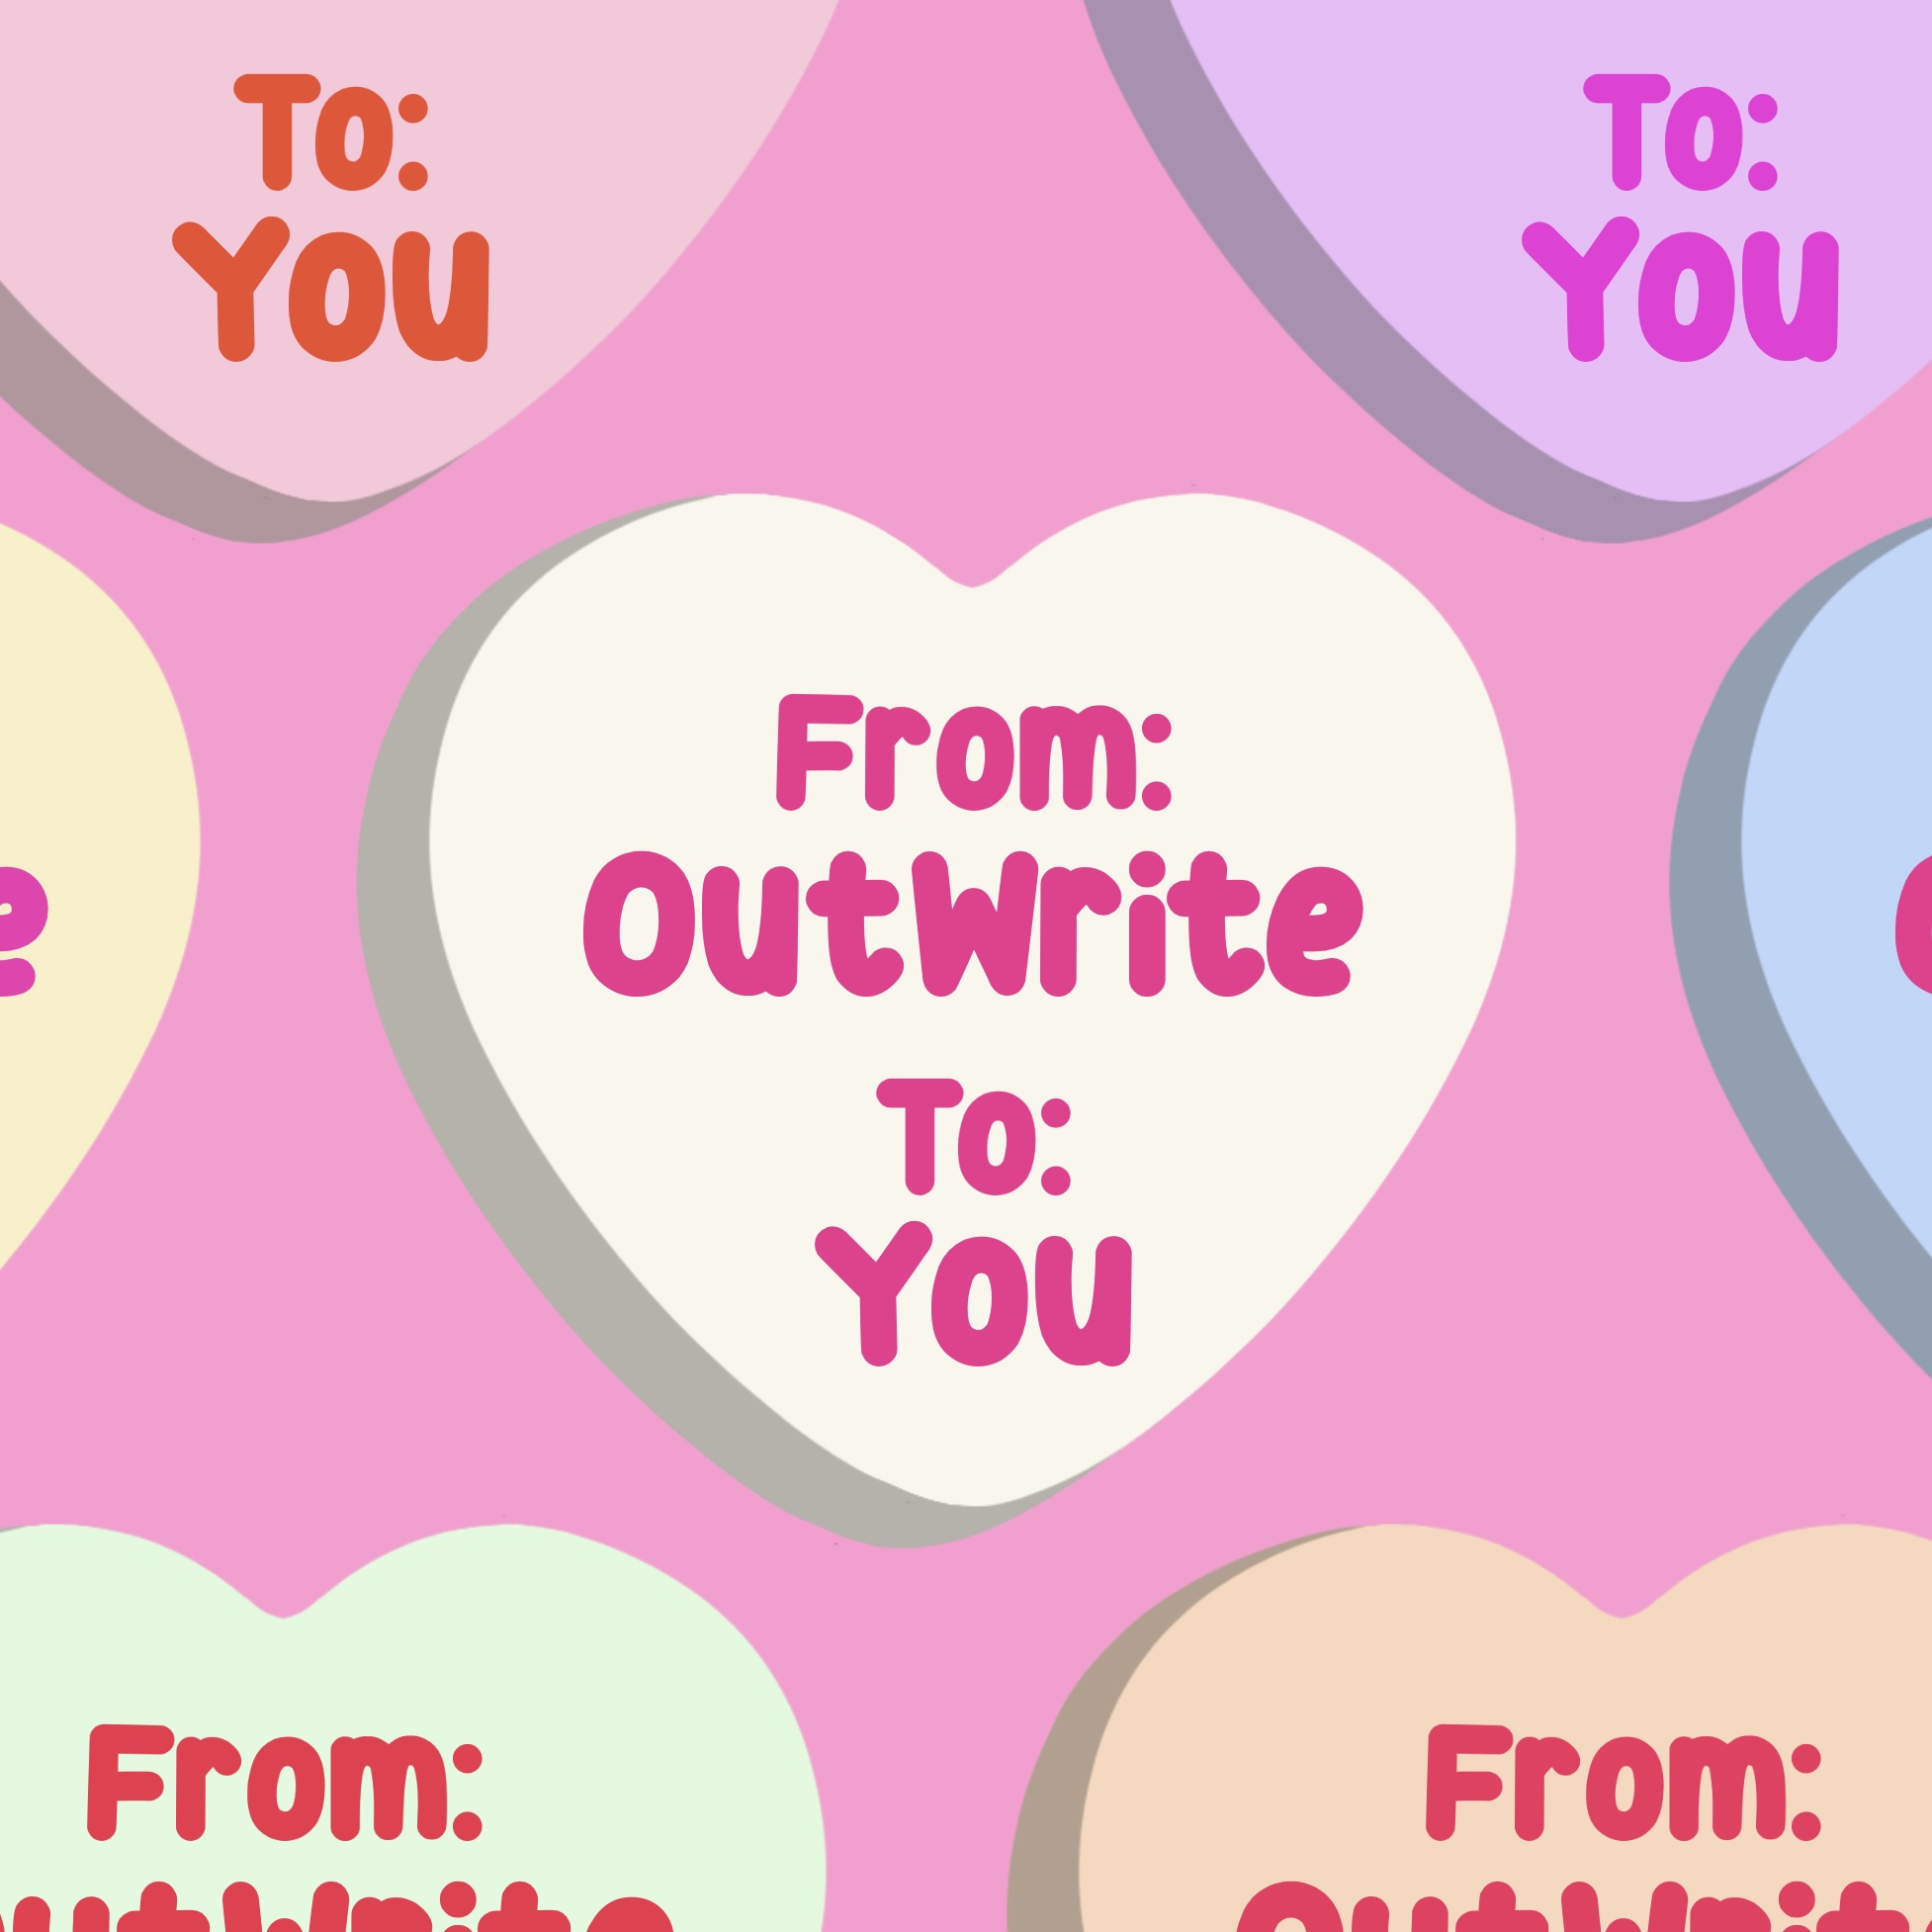 illustrated candy grams reading "from: Out Write, To: You"